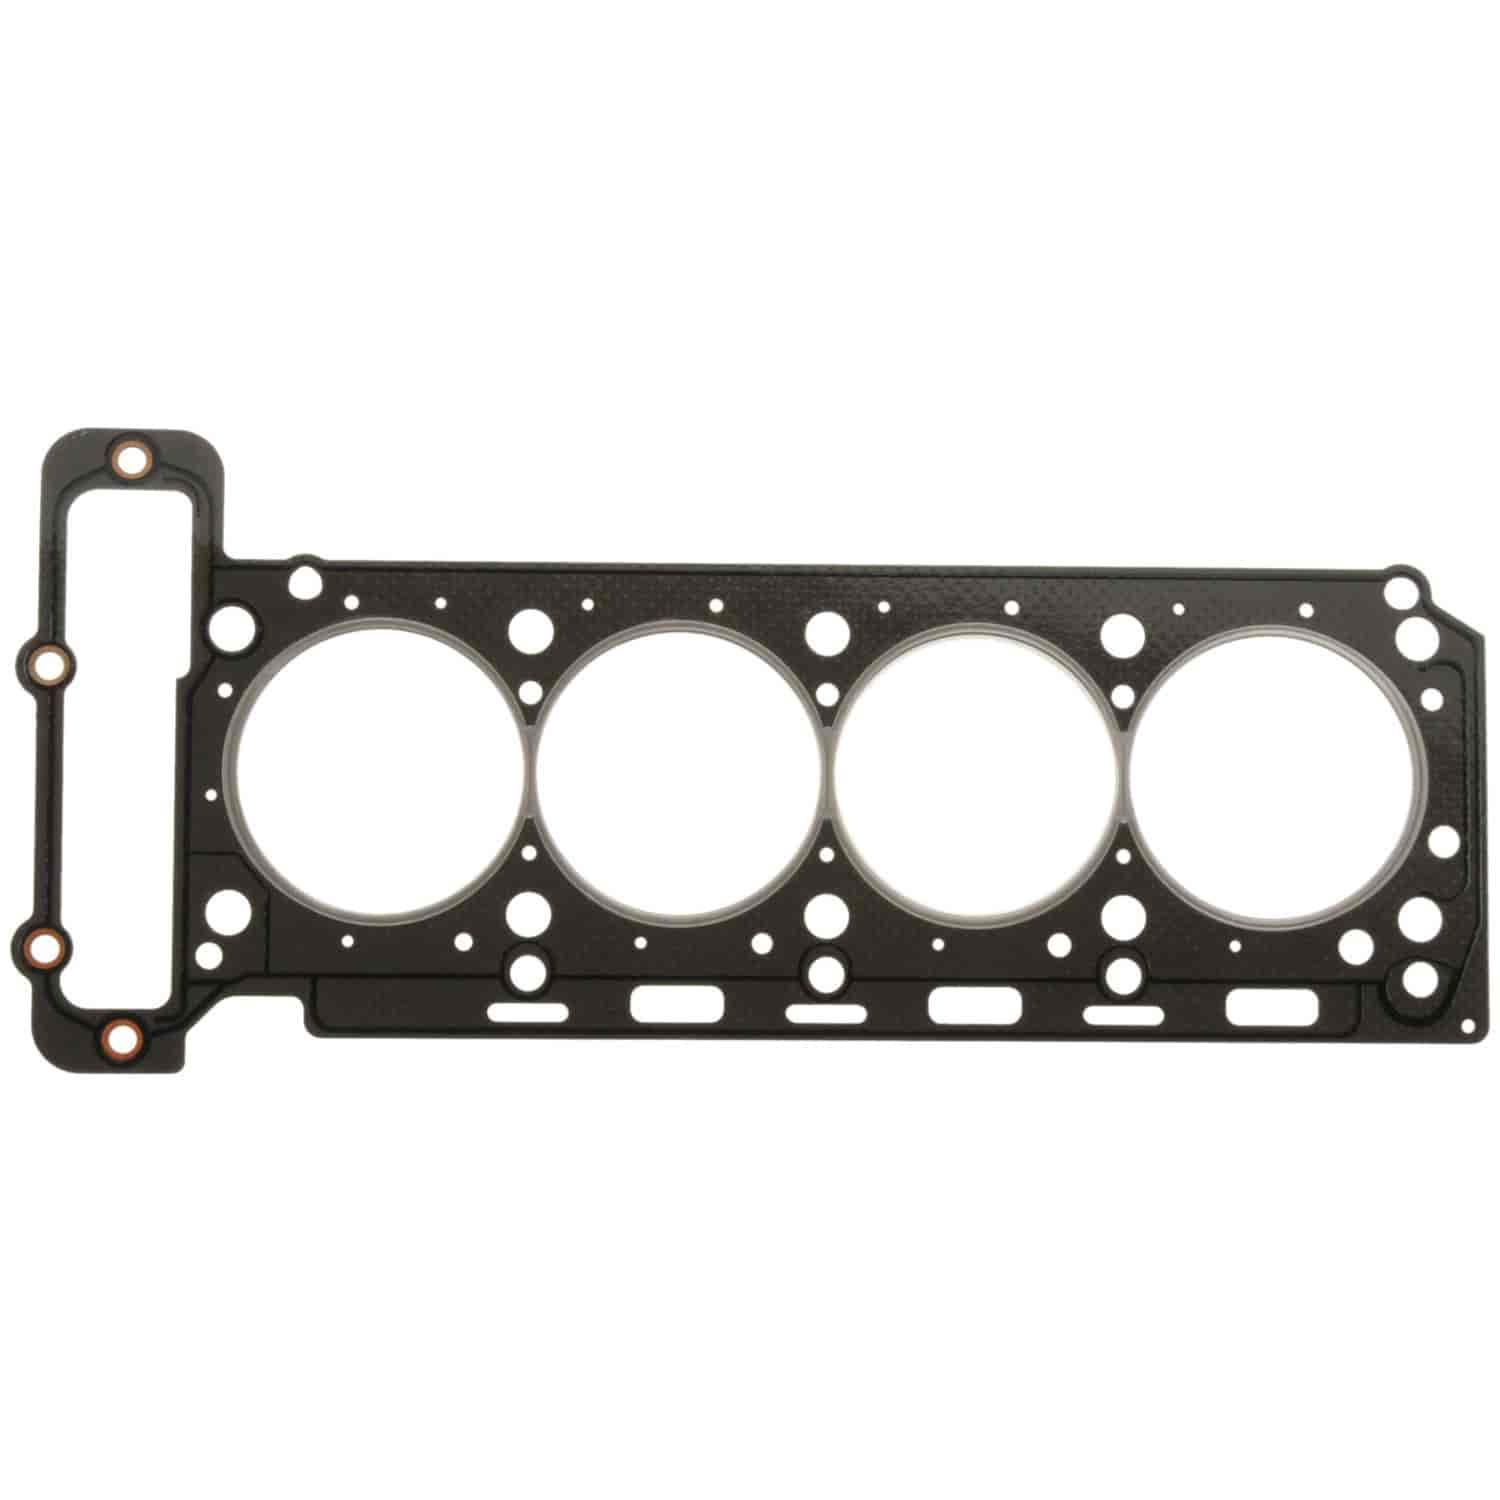 Cylinder Head Gasket MERCEDES BENZ 2295CC 2.3L 111.974 From Eng SN# 034487